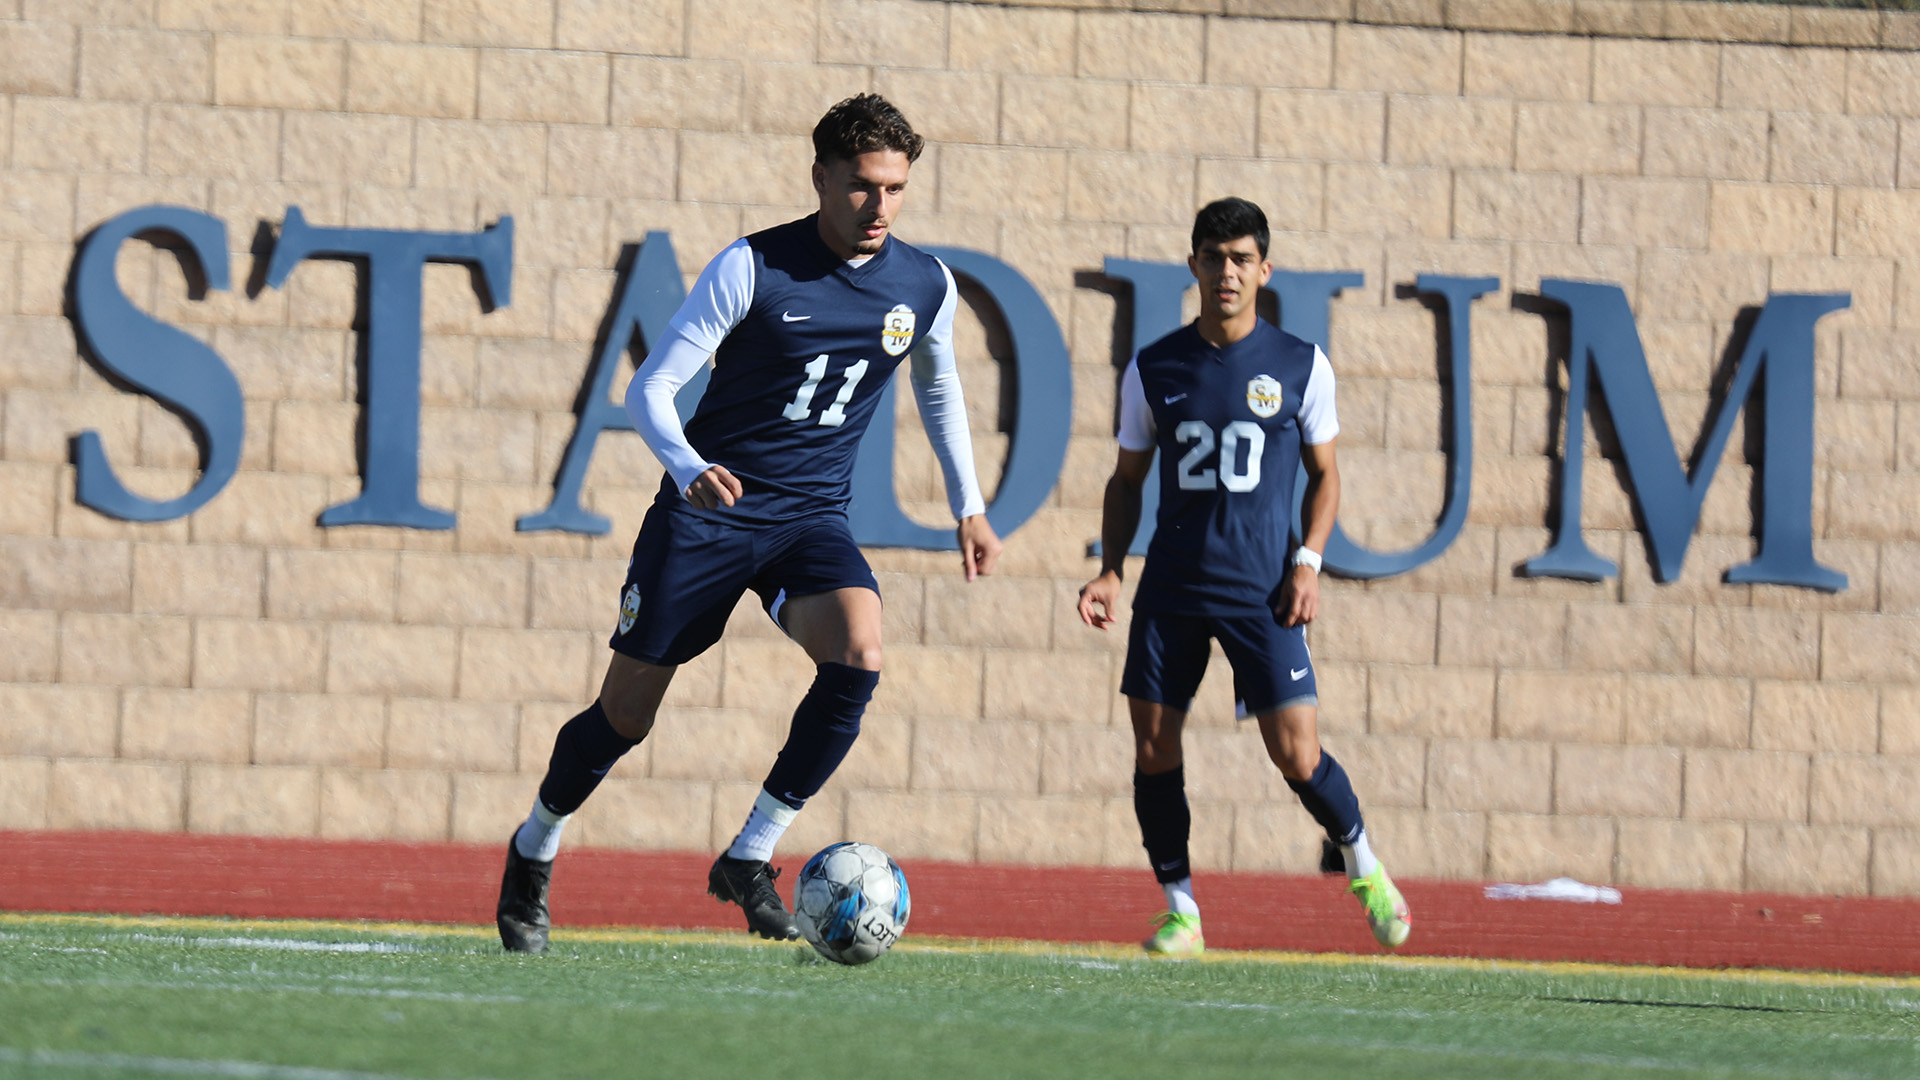 Peralta's Goal is Not Enough For Spires to Comeback in 2-1 Loss